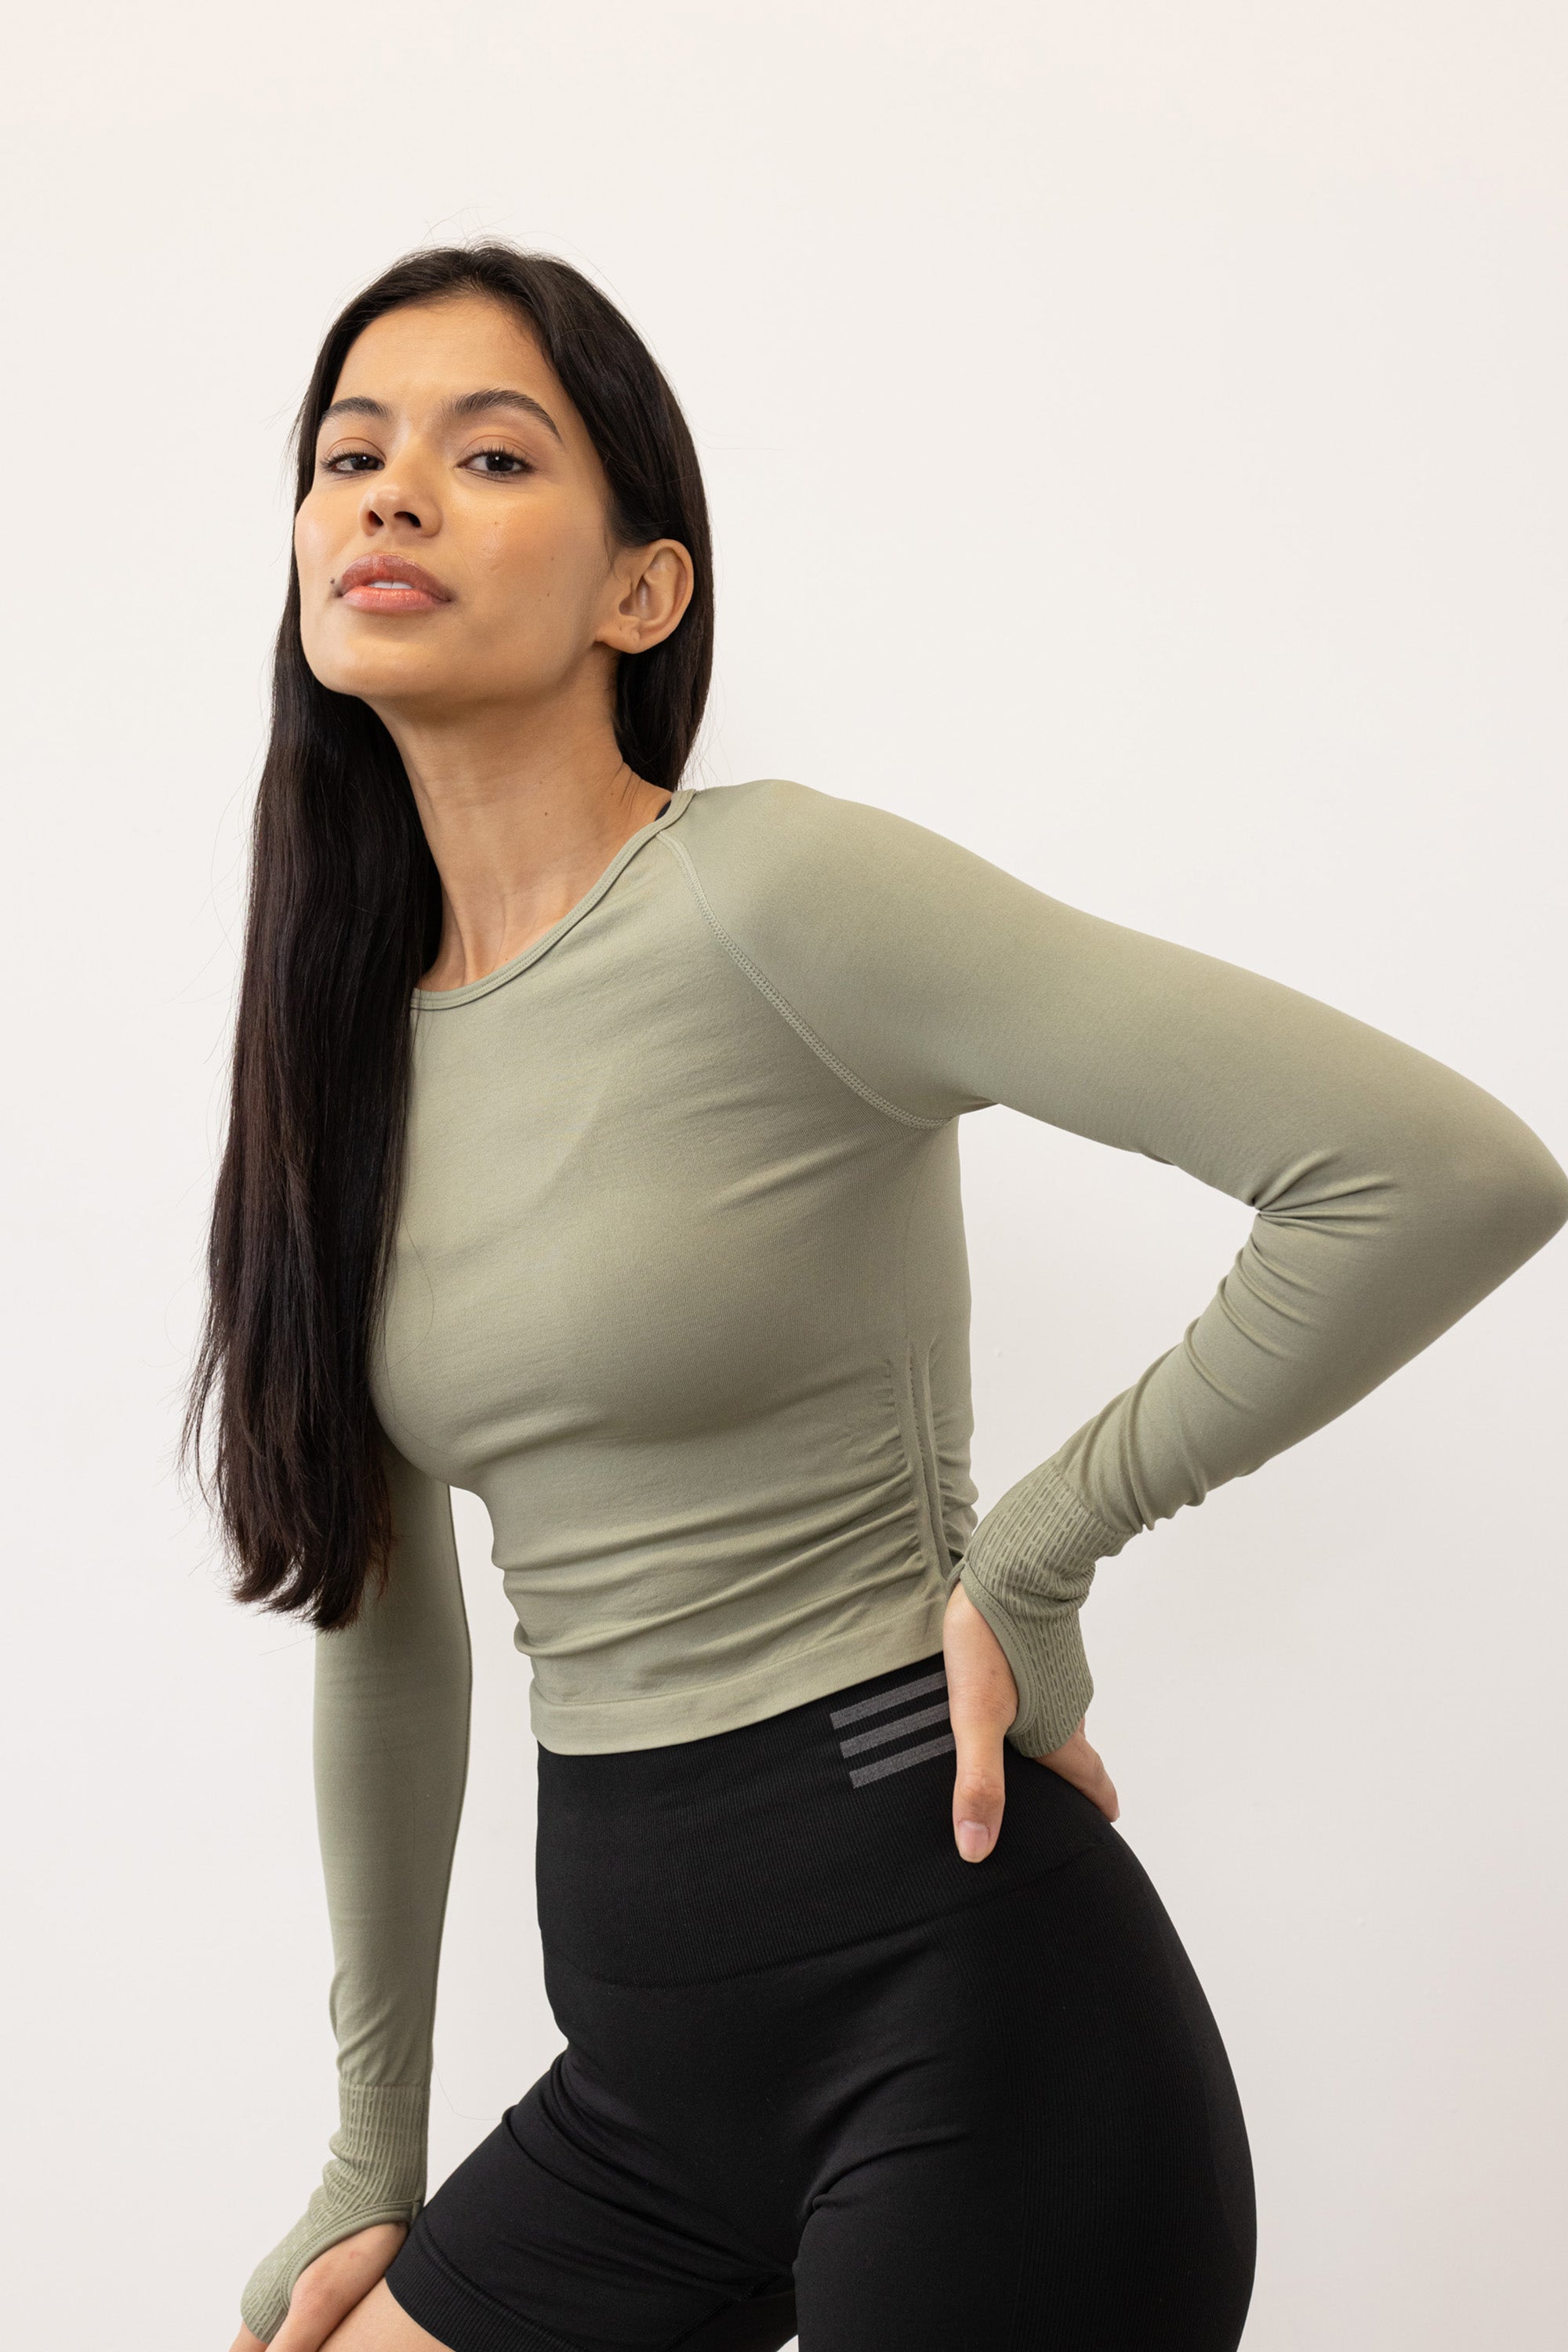 Seagrass green cutout back cropped long sleeve top with thumbholes and side ruching made from recycled fabrics for yoga, pilates, cycling, gym and exercise by sustainable activewear brand Jilla Active